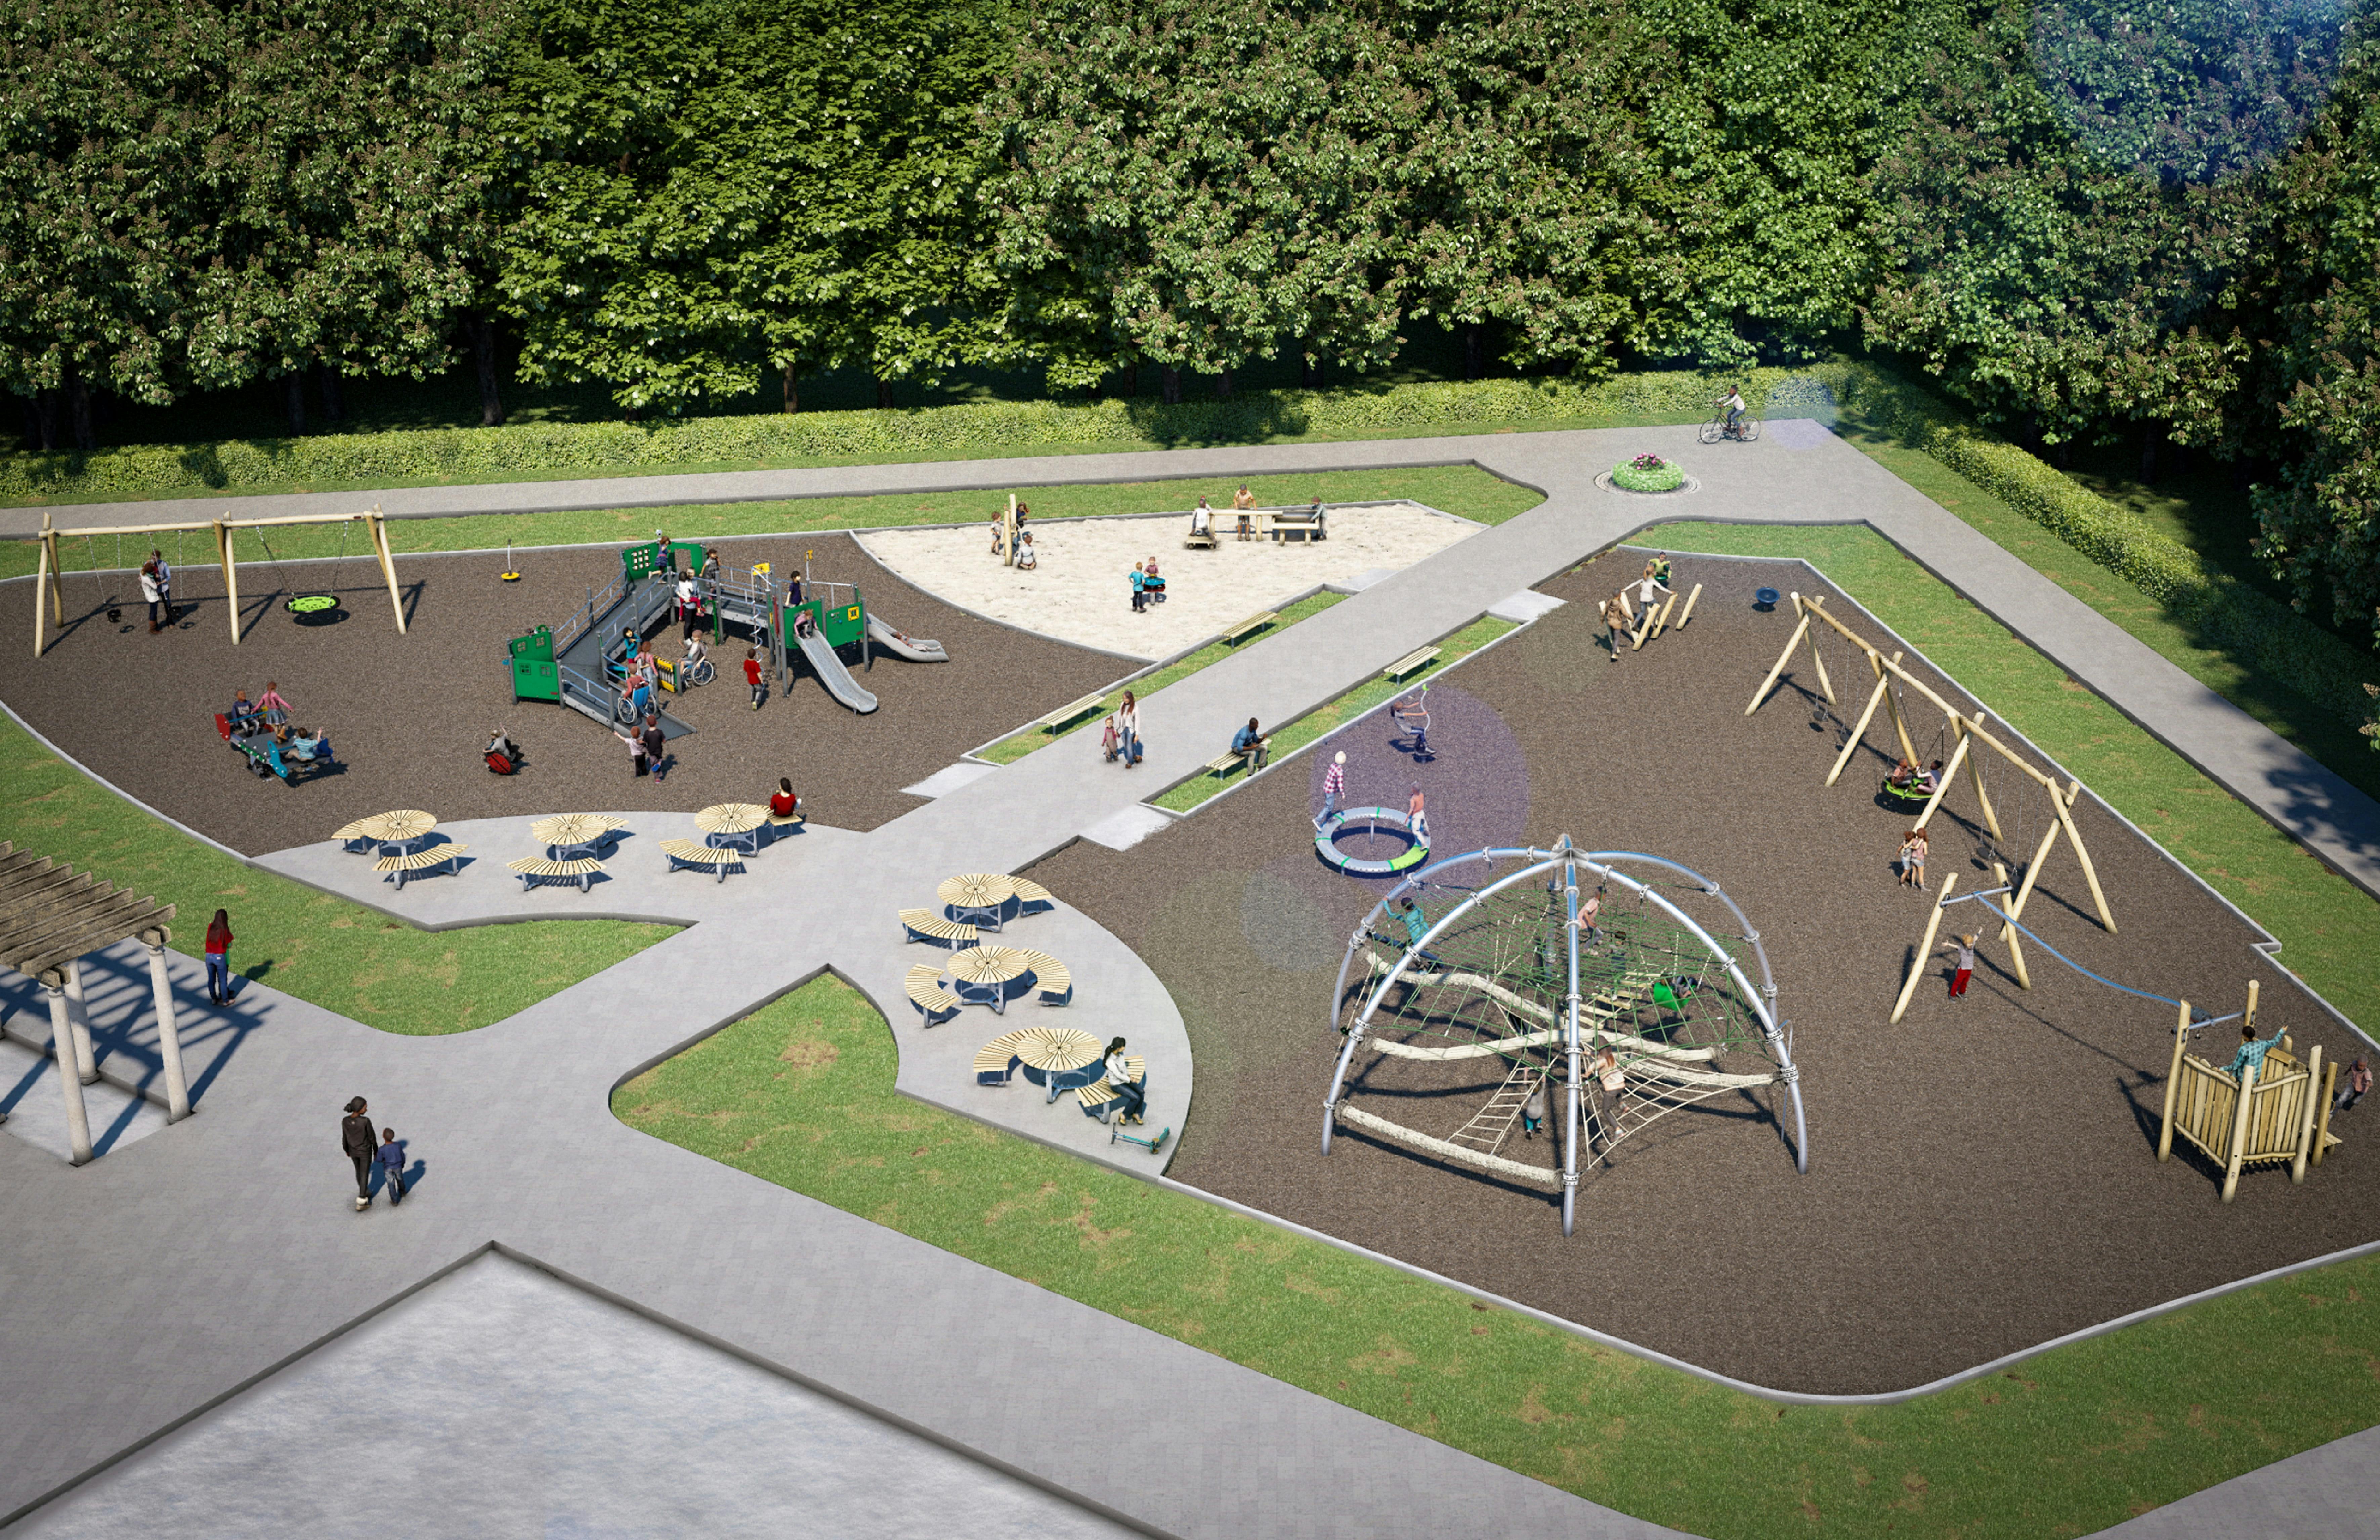 Playground A: All Play Areas